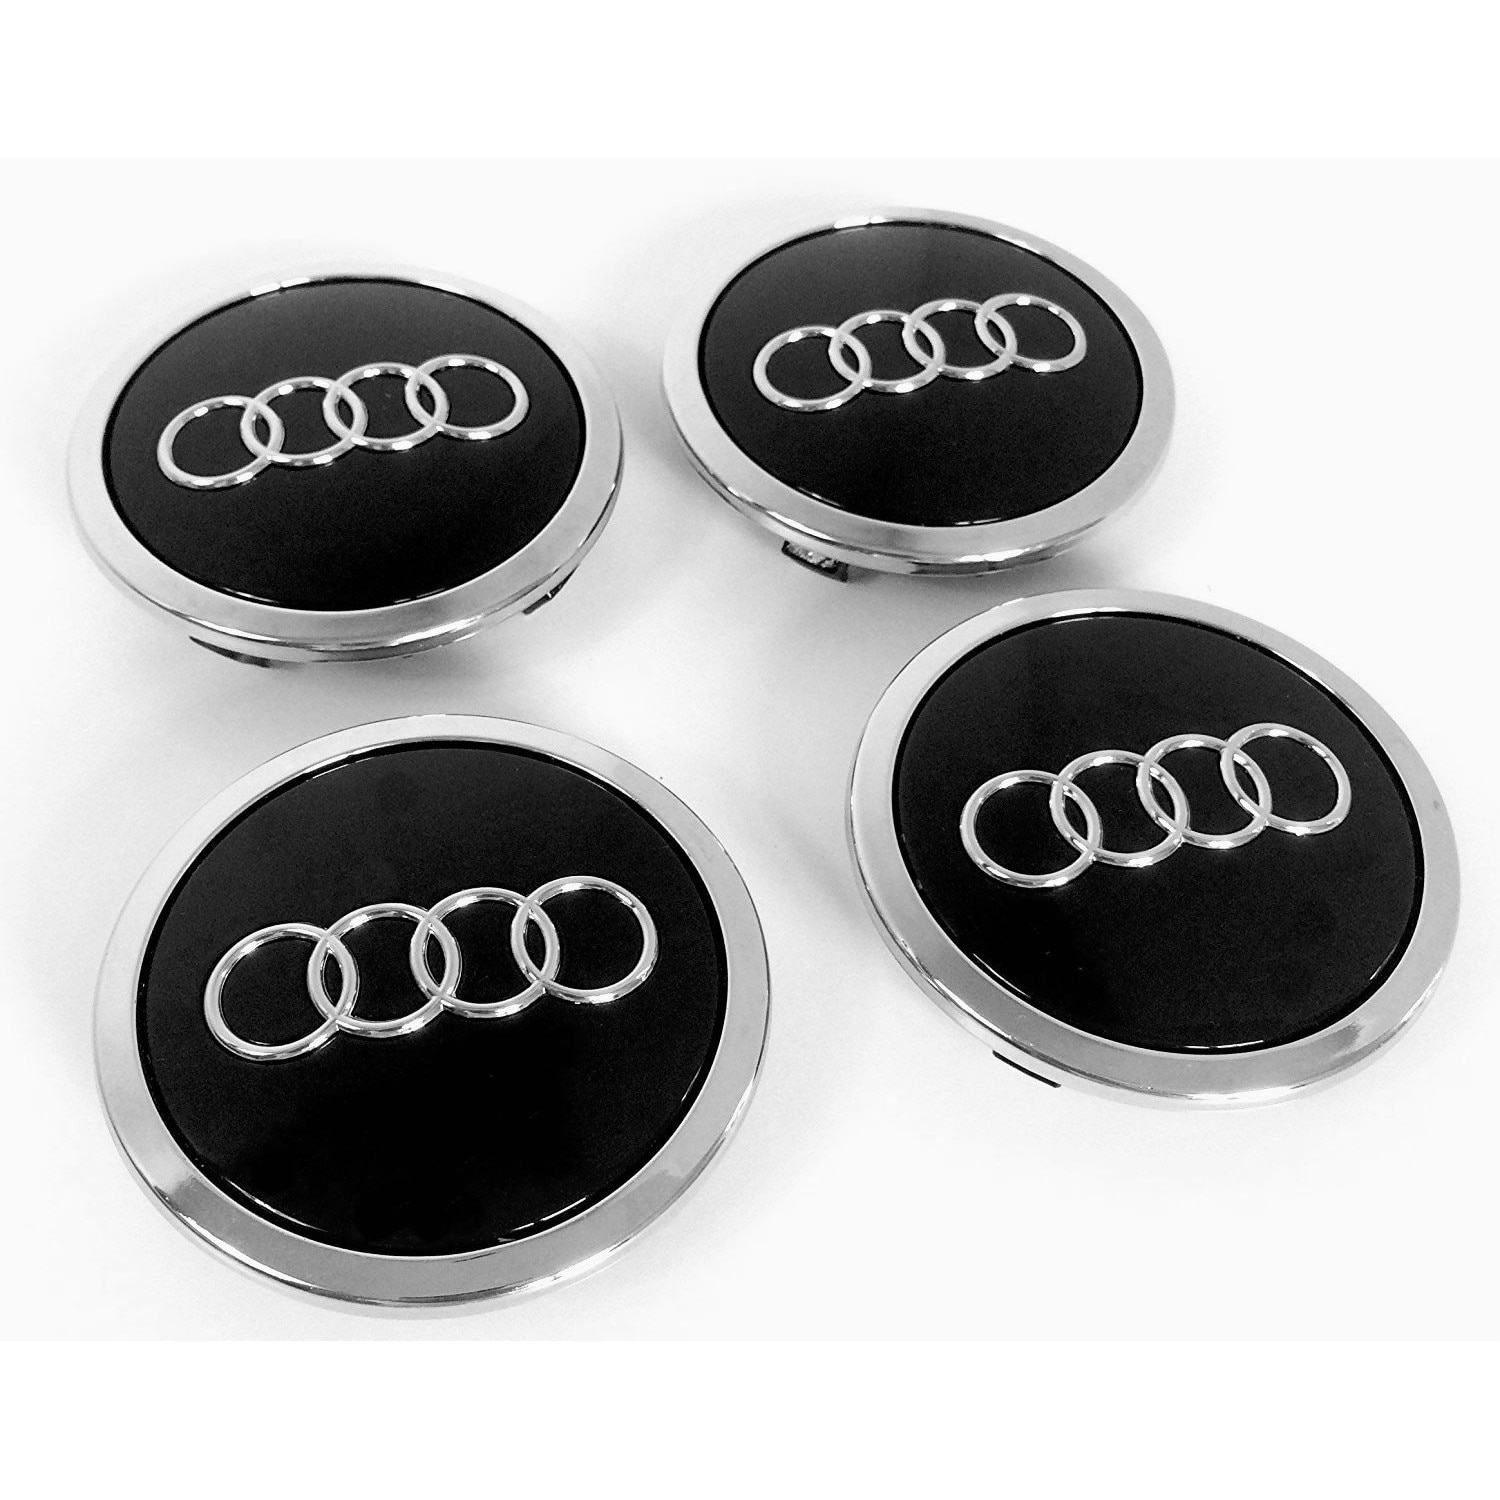 Grave About setting penalty Set 4 capacele roti 69mm negre, Audi A3, A4, A5, A6, A7, A8, Q3, Q5, Q7  pentru jante aliaj - eMAG.ro